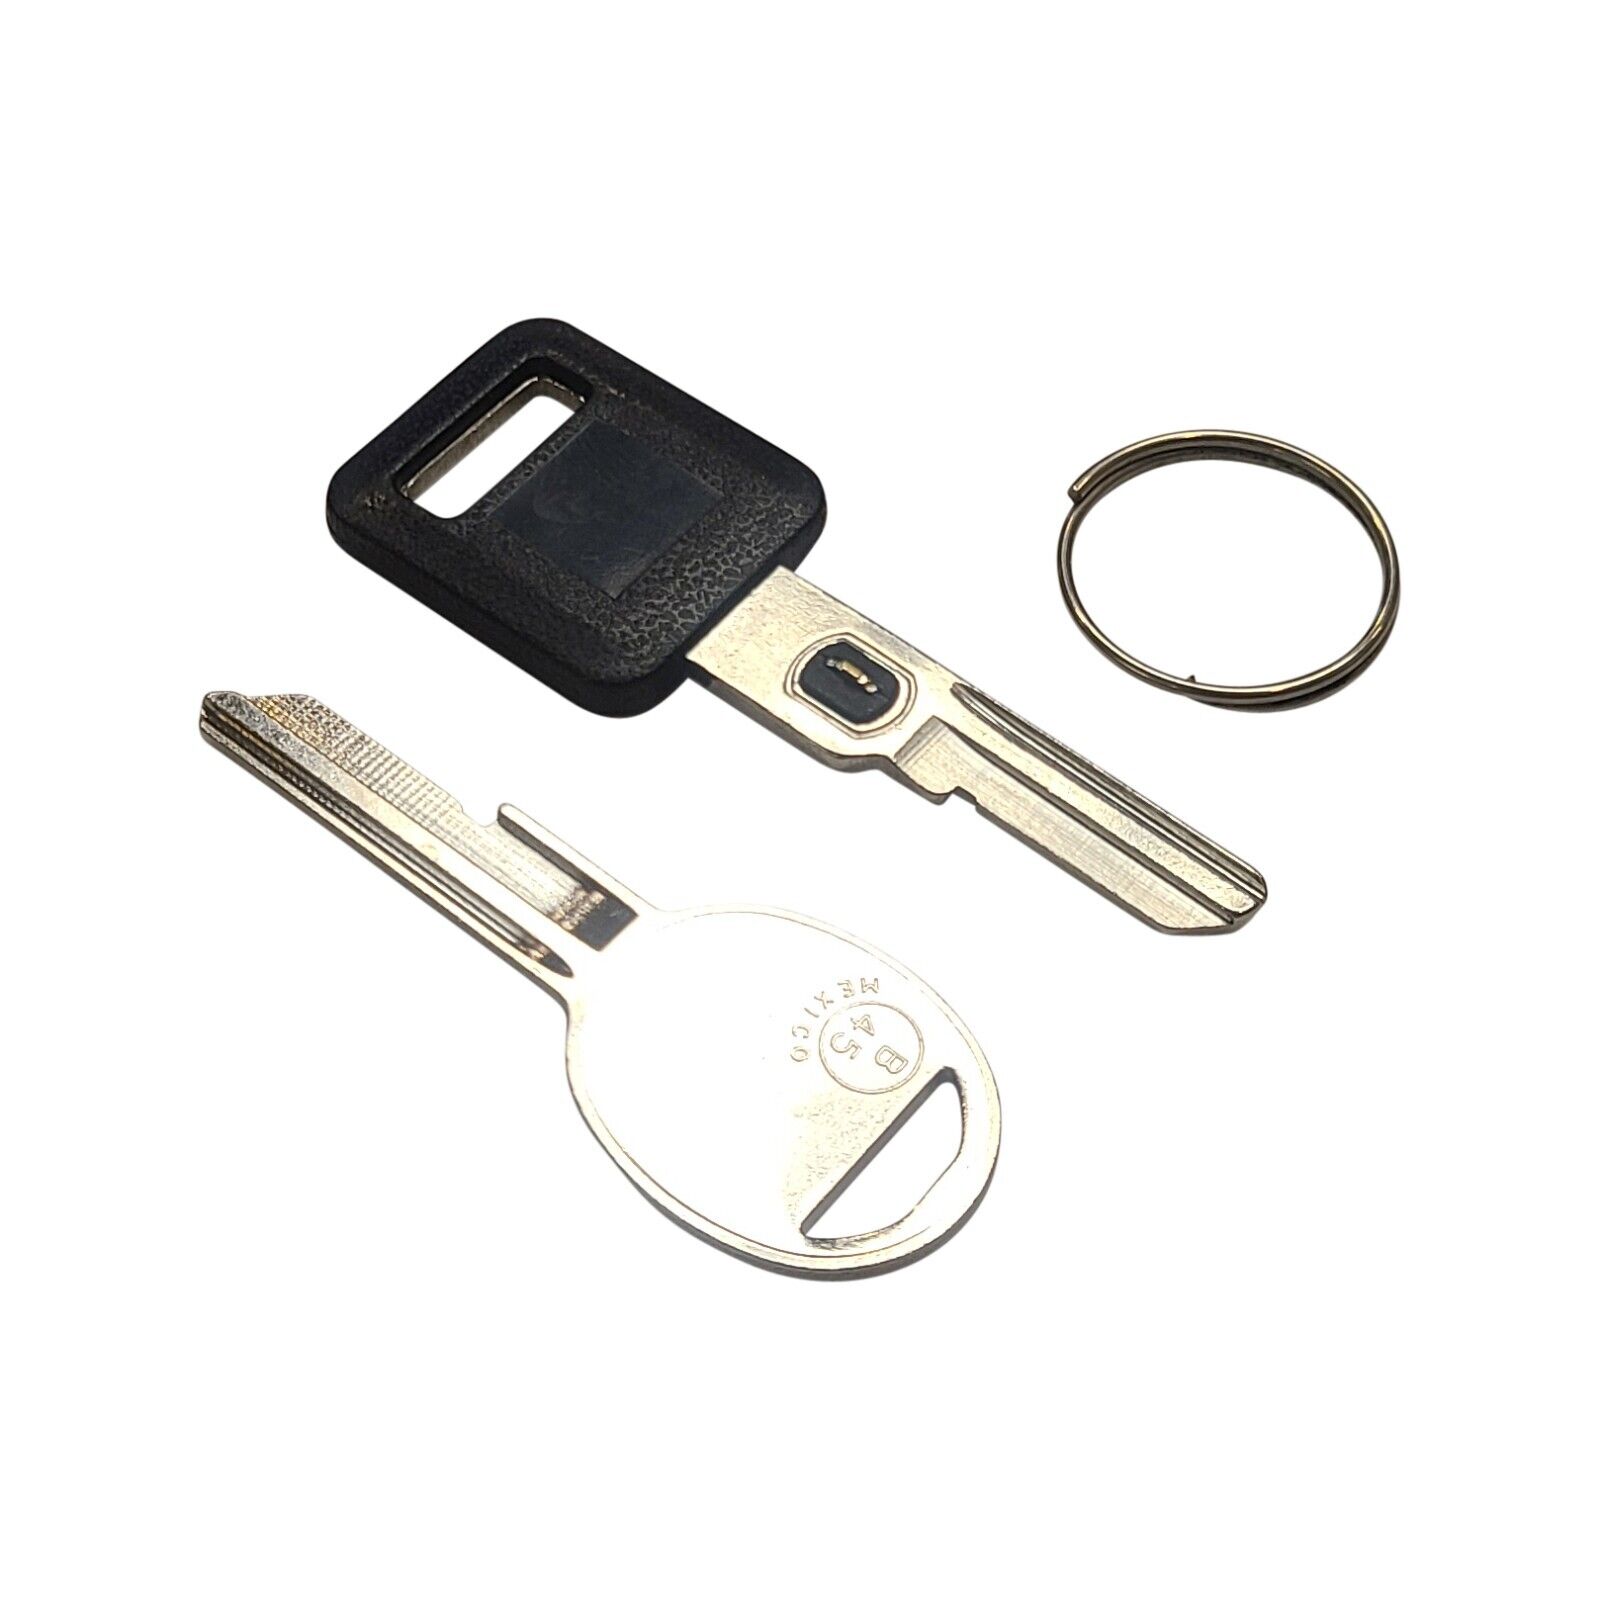 New Ignition VATS Resistor Key B62-P4 For Gm Vehicles And H Door Key B45